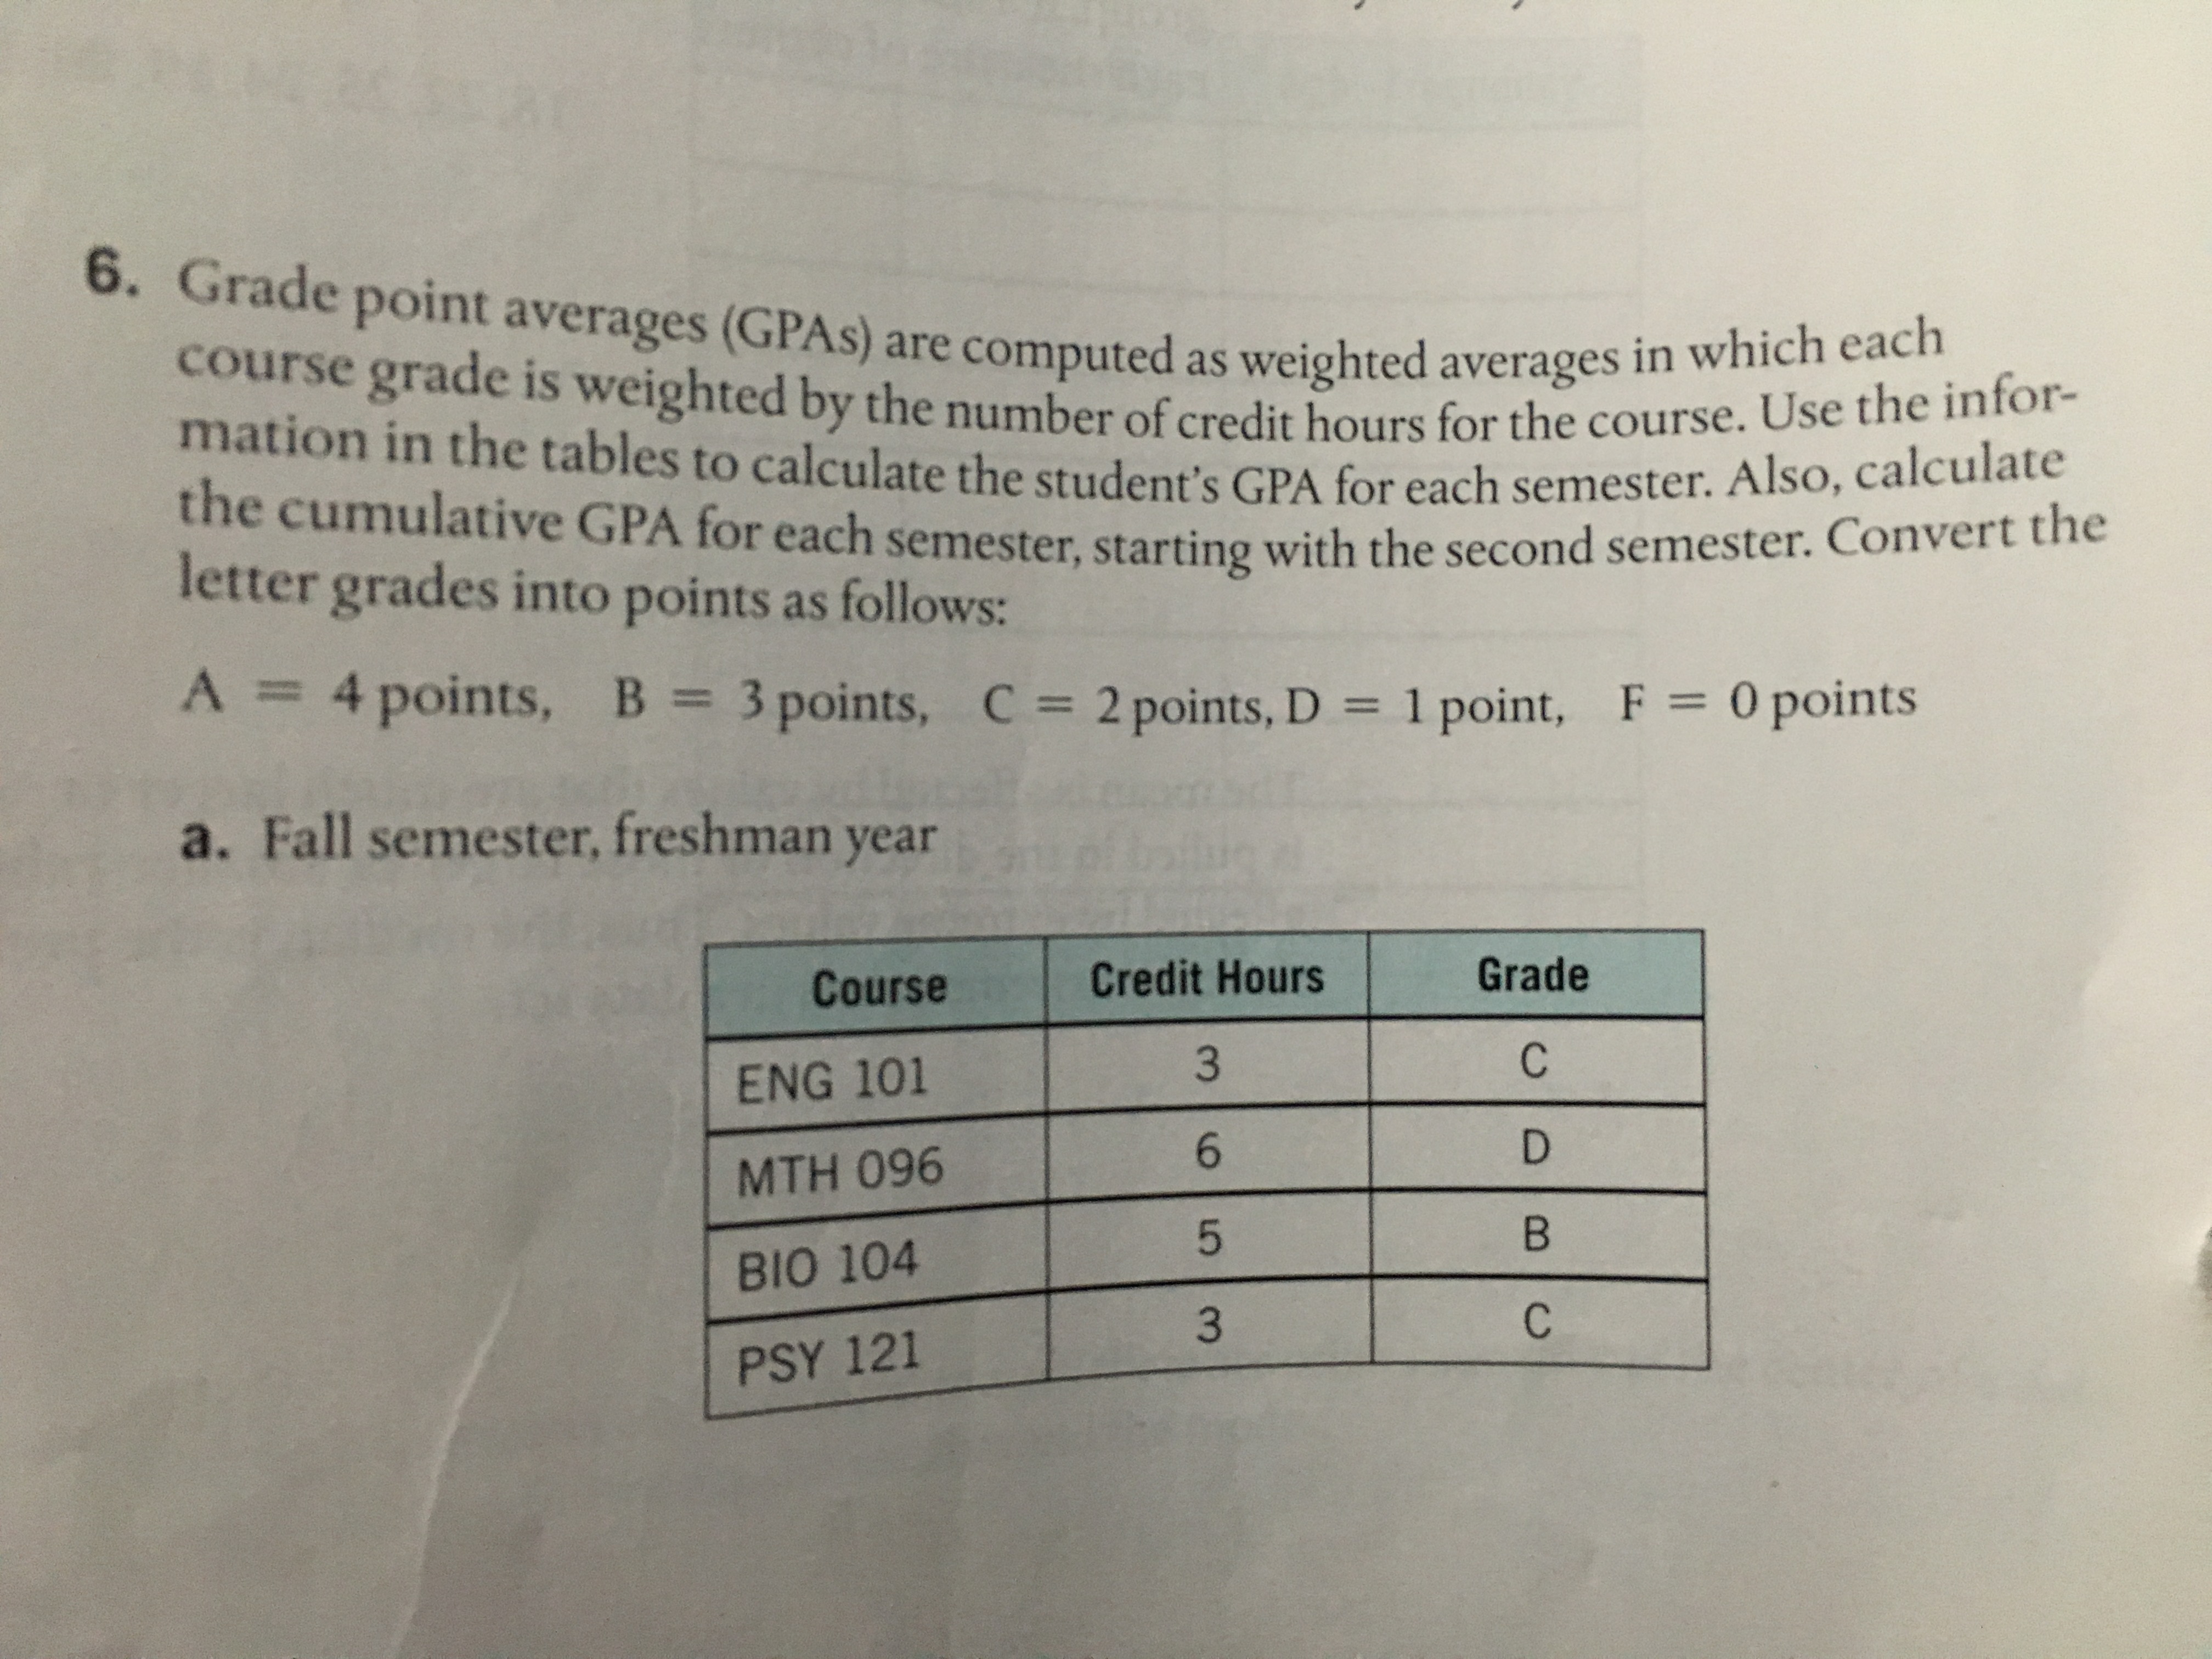 6. Grade point averages (GP
AS) are computed as weighted averages in which each
course grade is weighted by the number of credit hours for the course.
mation in the tables to calculate the student's GPA for each semester.
the cumulative
letter grades into points as follows:
Use the infor-
Also, calculate
GPA f
or each semester, starting with the second semester. Convert the
A 4 points, B 3points, C 2 points, D 1 point, F Opoints
a. Fall semester, freshman year
ourse Credit Hours
Grade
ENG 101
MTH 096
BIO 104
PSY 121
6
3
